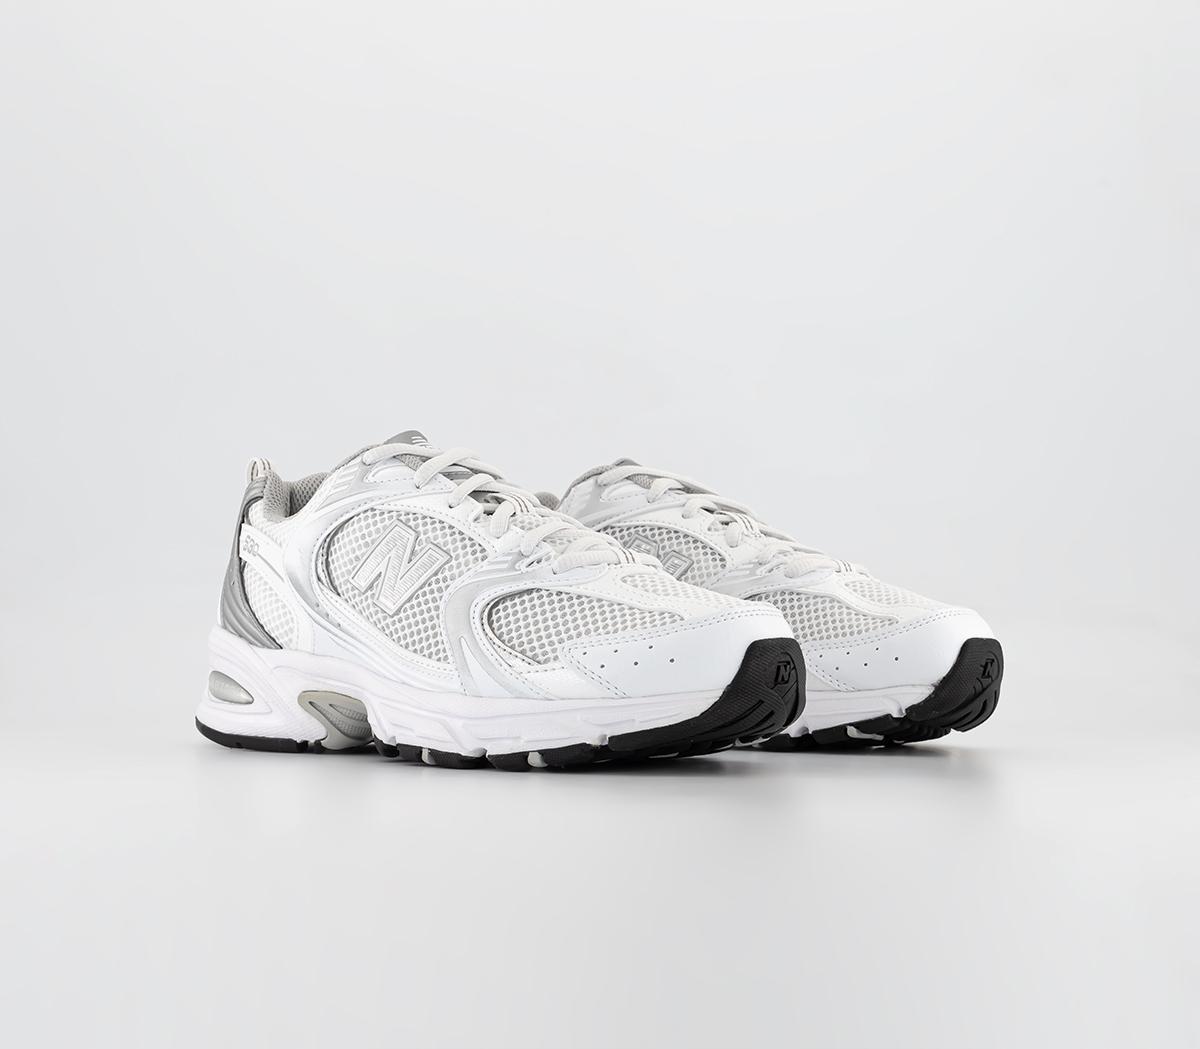 New Balance Womens Mr530 Trainers White Silver, 11.5